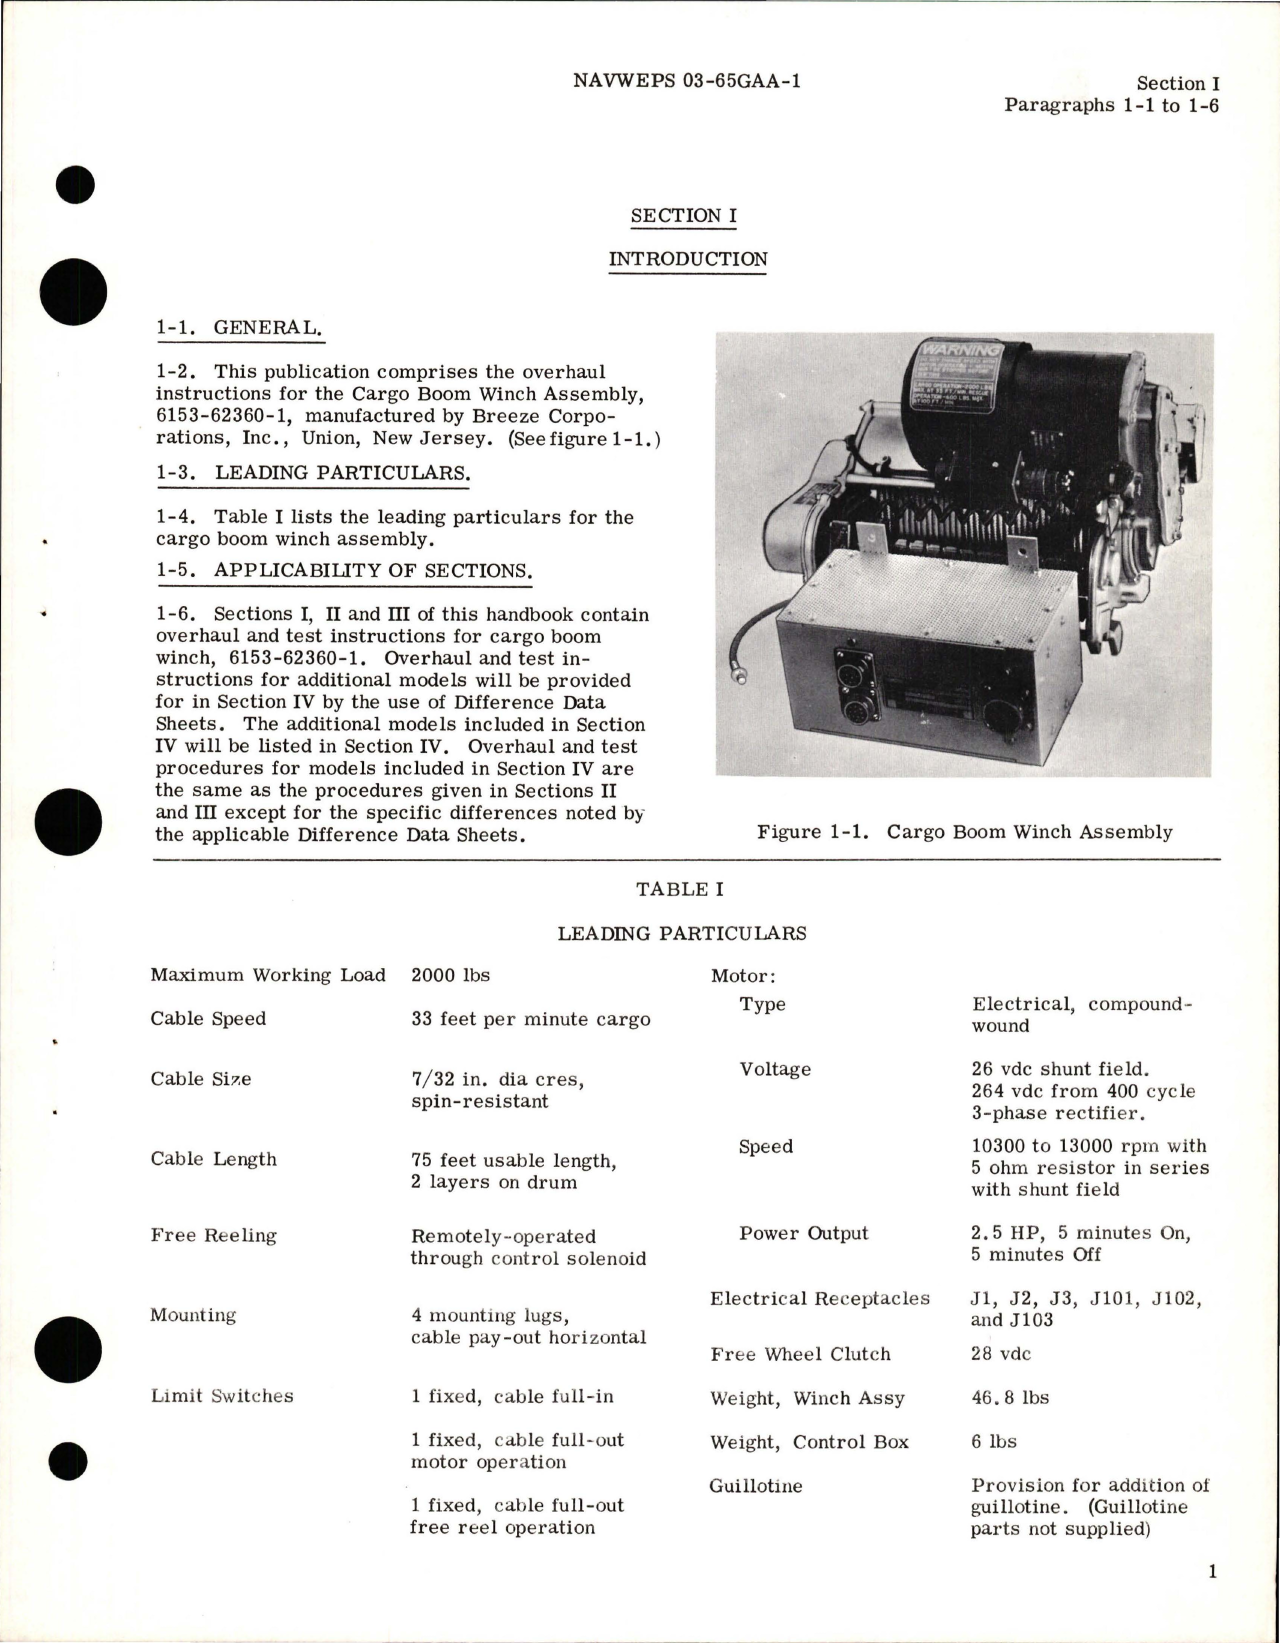 Sample page 5 from AirCorps Library document: Overhaul Instructions for Cargo Boom Winch Assembly - Part 6153-62360-1